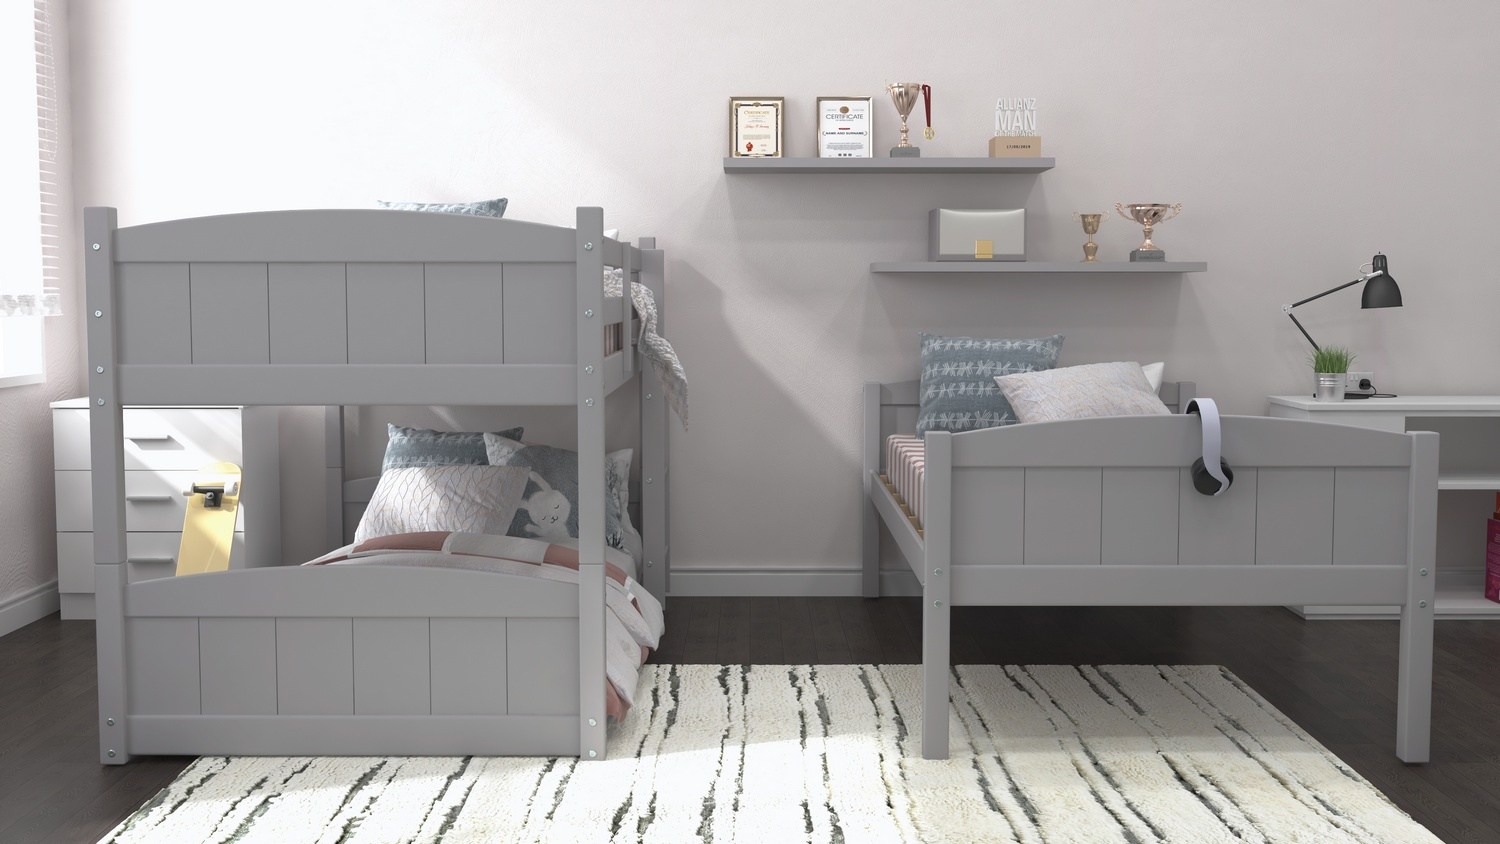 Hillsdale Alexis Wood Arch Triple Twin Bunk Bed - Gray